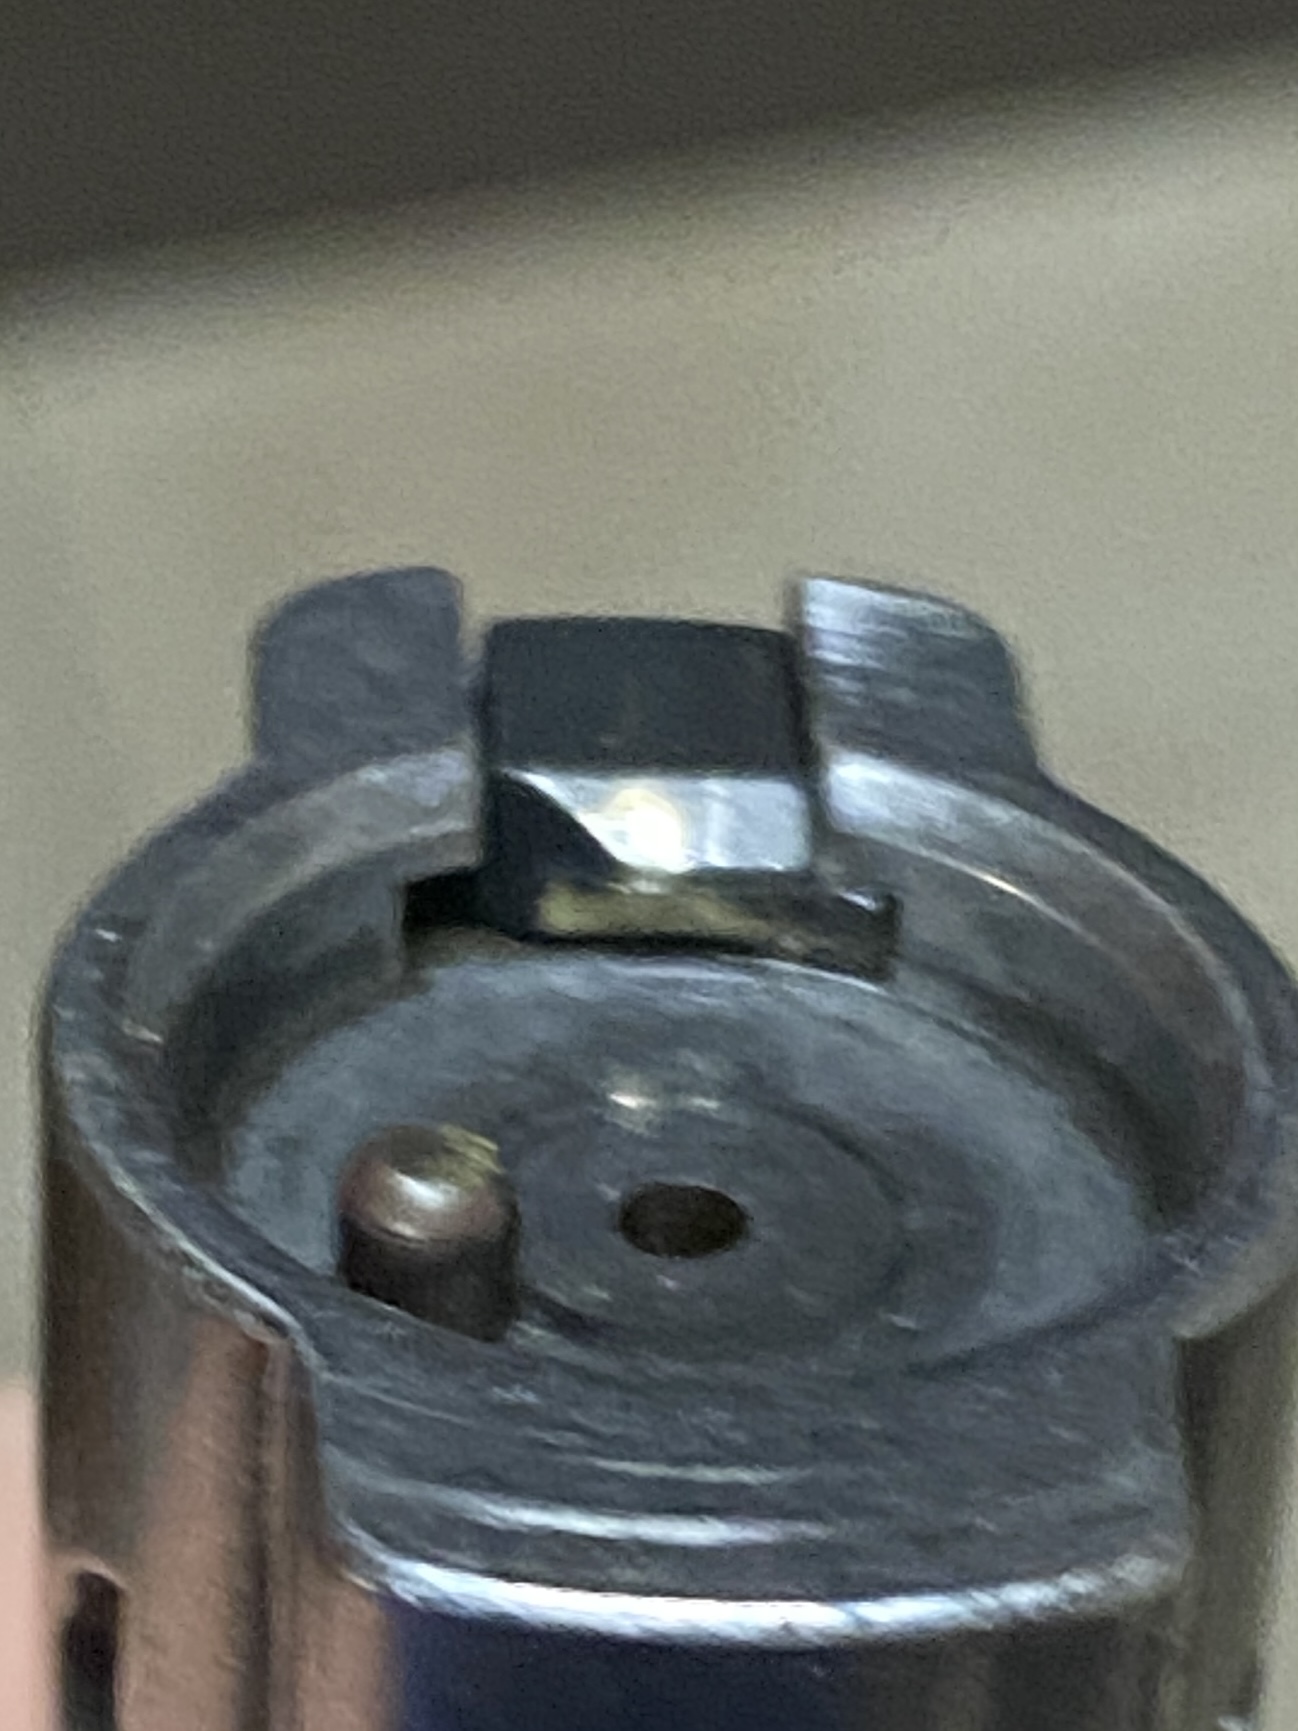 Instax wide 300 broken ejector arm. Any idea of how to fix this? It seems  that a small piece broke from the arm and it is no longer connecting with  the metal